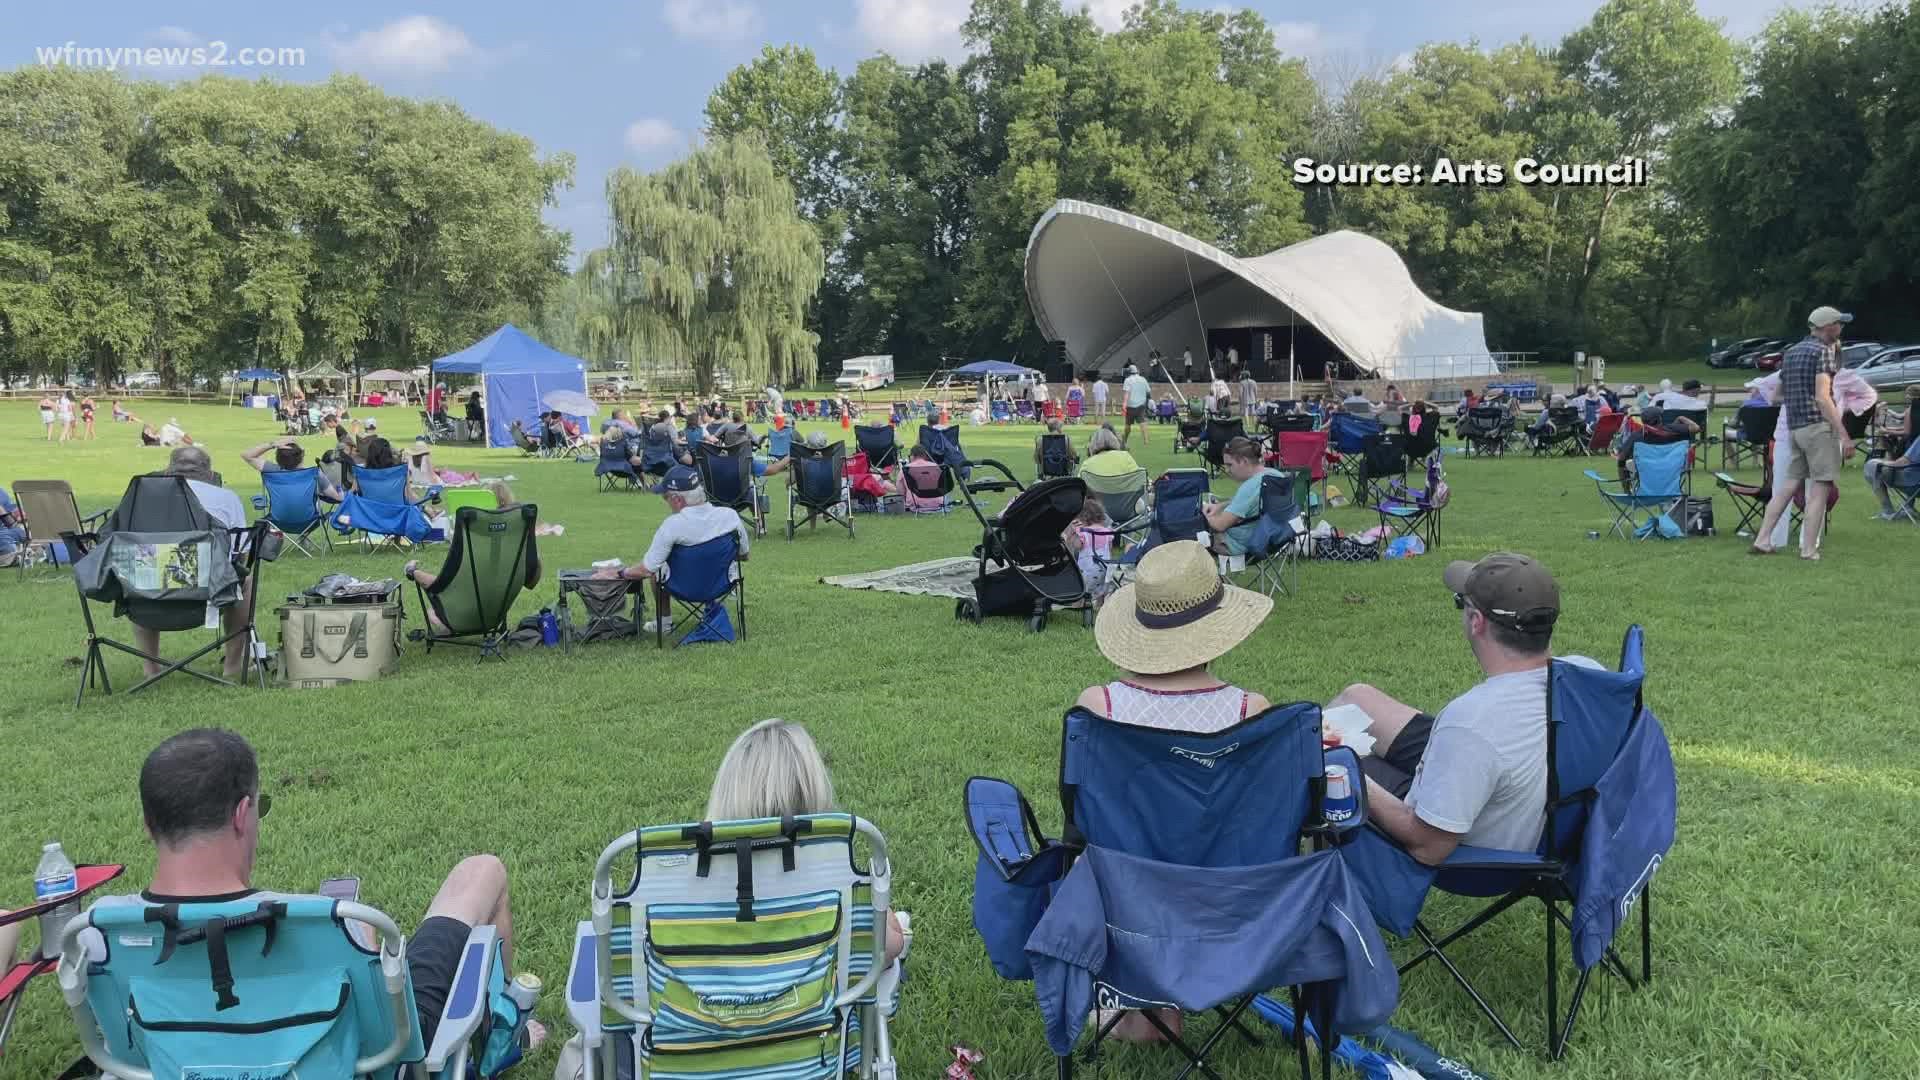 The Summer Parks Concert Series has two more events to wrap up the summer. Friday night’s event will feature local band West End Mambo.